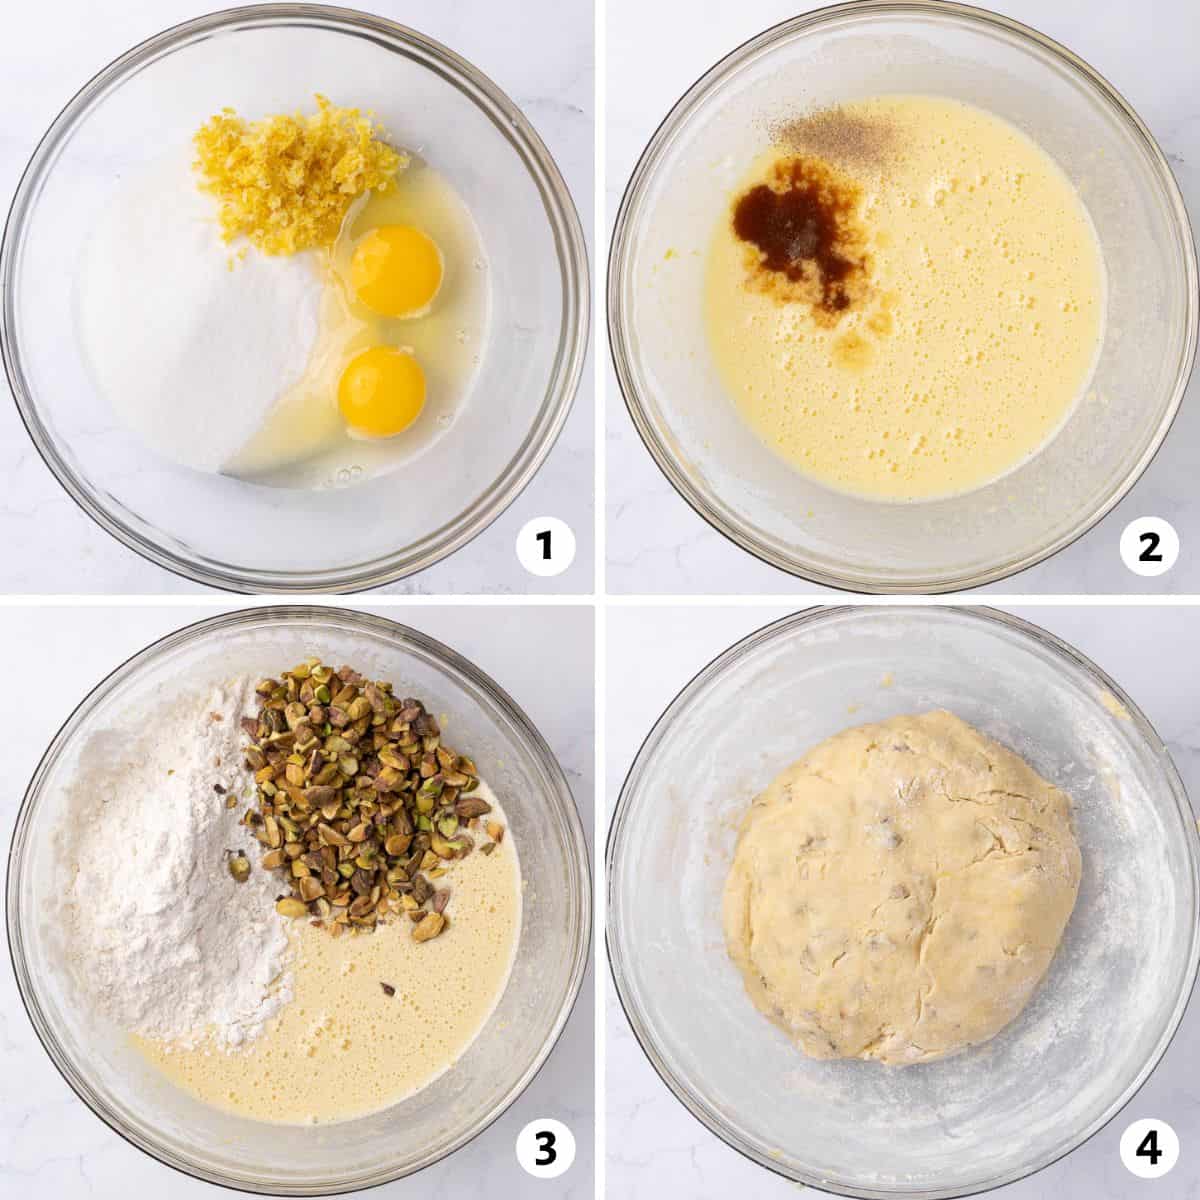 4 image collage making recipe in a bowl: 1- eggs, sugar, and lemon zest added, 2- after mixing with vanilla added, 3- flour and pistachios added, 4- dough after mixing.